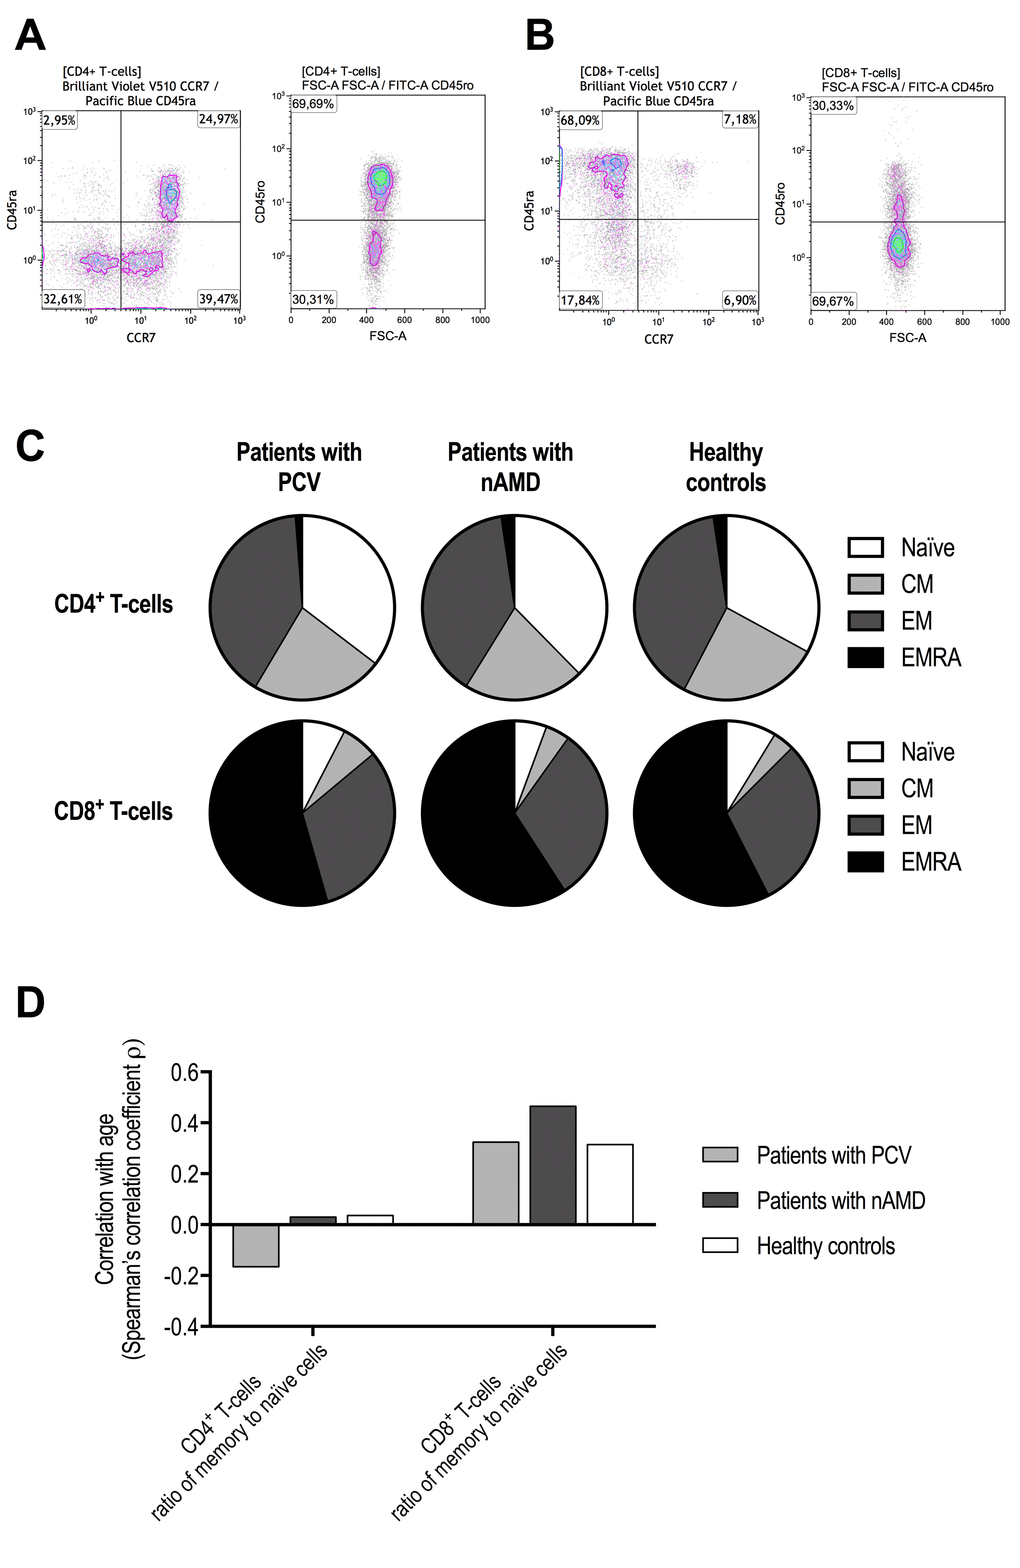 Functional differentiation profile of CD4+ and CD8+ T-cells in patients with polypoidal choroidal vasculopathy (PCV), patients with neovascular age-related macular degeneration (nAMD), and healthy controls. Cells were defined as naïve T-cells CD45ra+CD45ro-CCR7+, central memory T-cells (CM) CD45ra-CD45ro+CCR7+, effector memory T-cells (EM) CD45ra-CD45ro+CCR7-, and effector memory CD45ra+ T-cells (EMRA) CD45ra+CD45ro+CCR7-. These subsets were separately identified in CD4+ T-cells (A) and CD8+ T-cells (B). (C) We found no significant differences between patients with PCV, patients with nAMD, and healthy controls (P > 0.05 for all comparisons using Kruskal-Wallis test). (D) Age-related changes in the ratio of memory to naïve T-cells indicated no age-related change in CD4+ T-cells, but a clear age-related increase in CD8+ T-cells that appeared stronger in patients with nAMD.